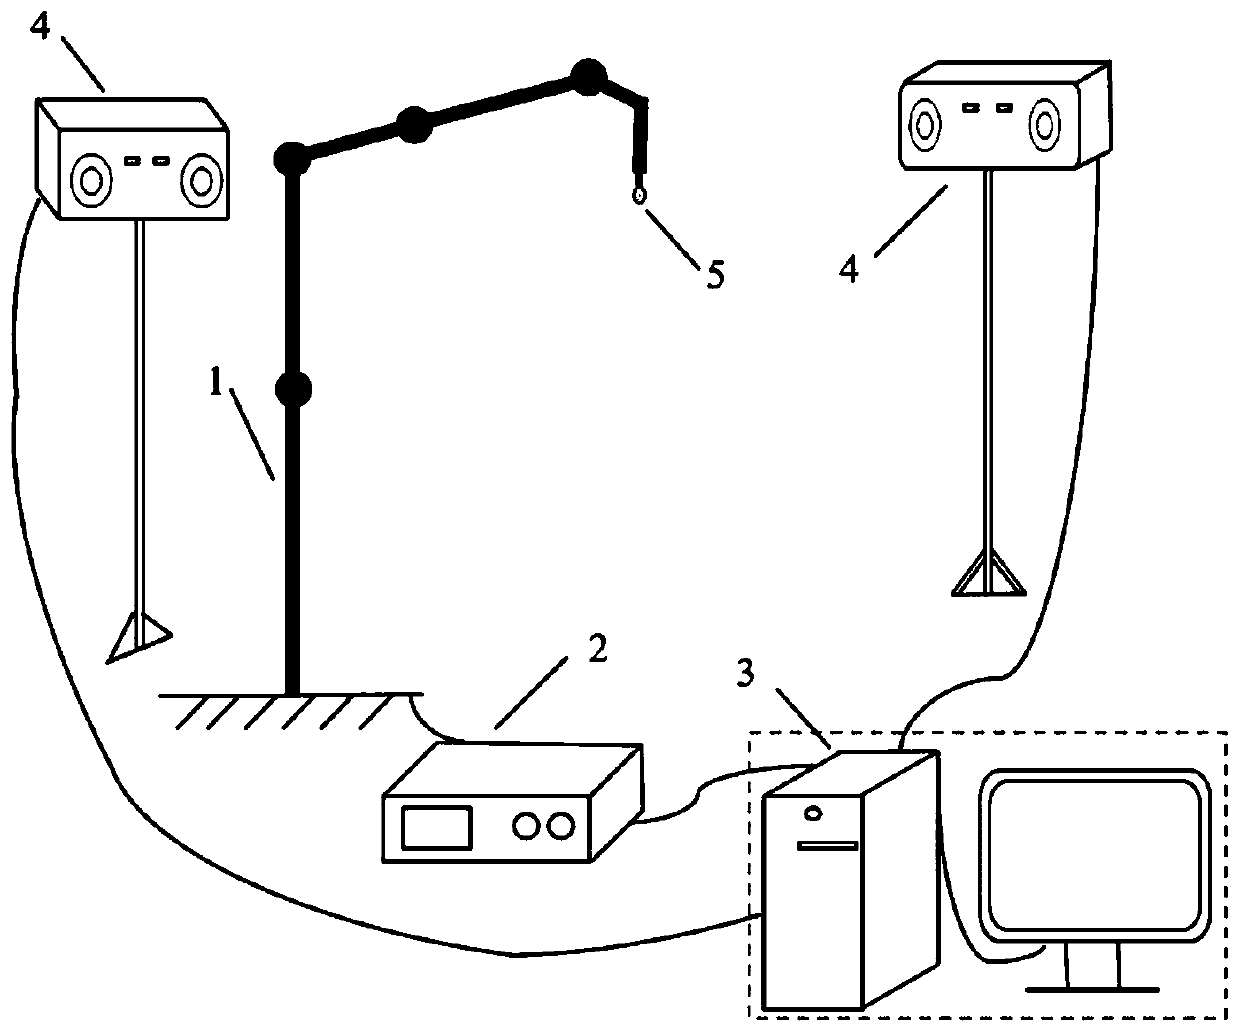 Mechanical arm calibration system and calibration method based on four-eye stereo vision